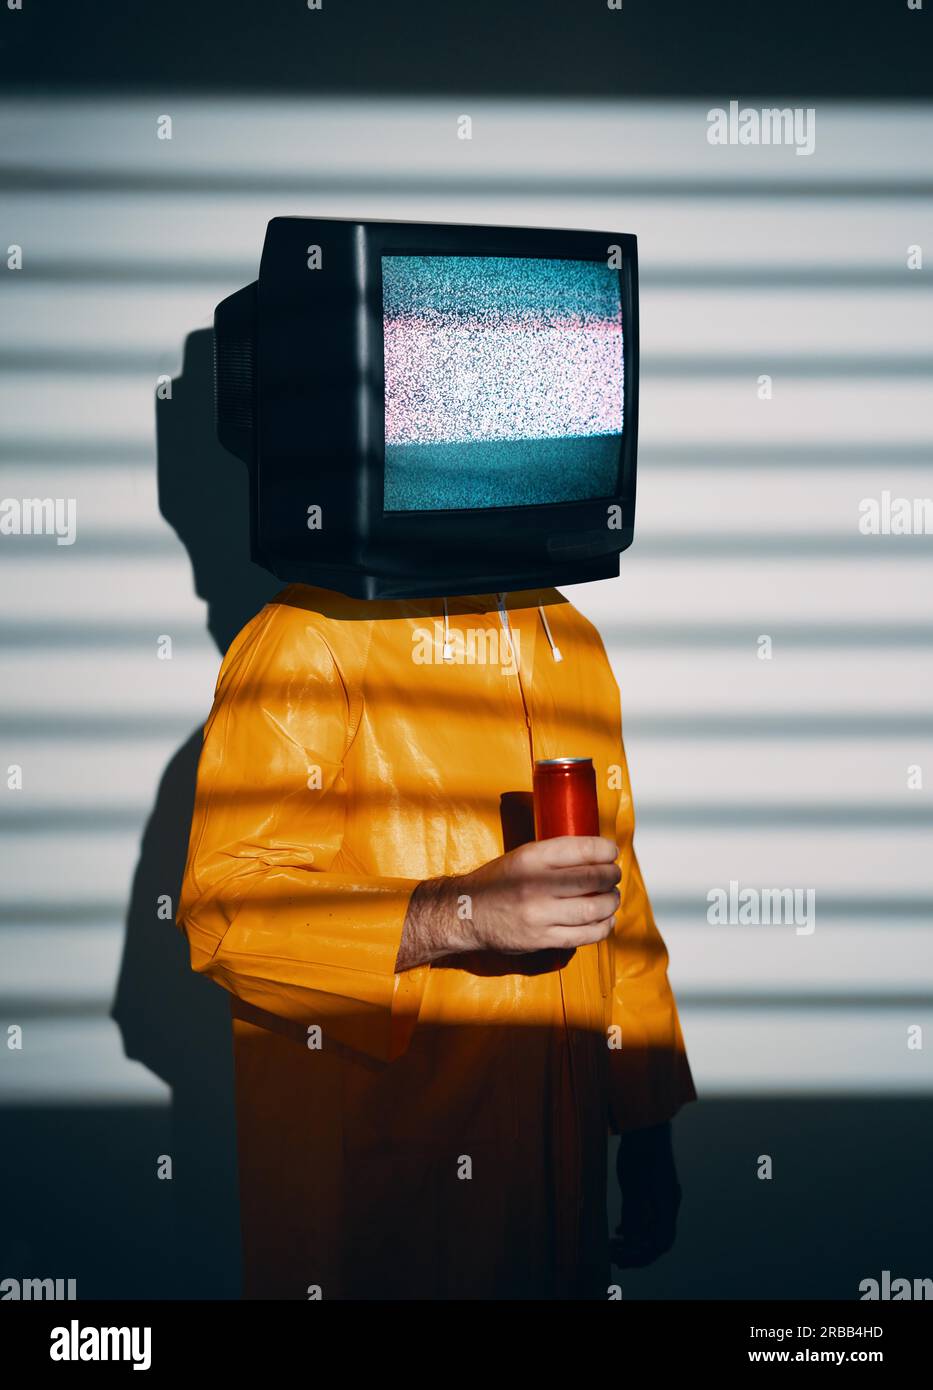 Surreal art of TV addicted man with television instead of head. Media zombie concept with male in bright yellow raincoat holding sweet soda in a red Stock Photo